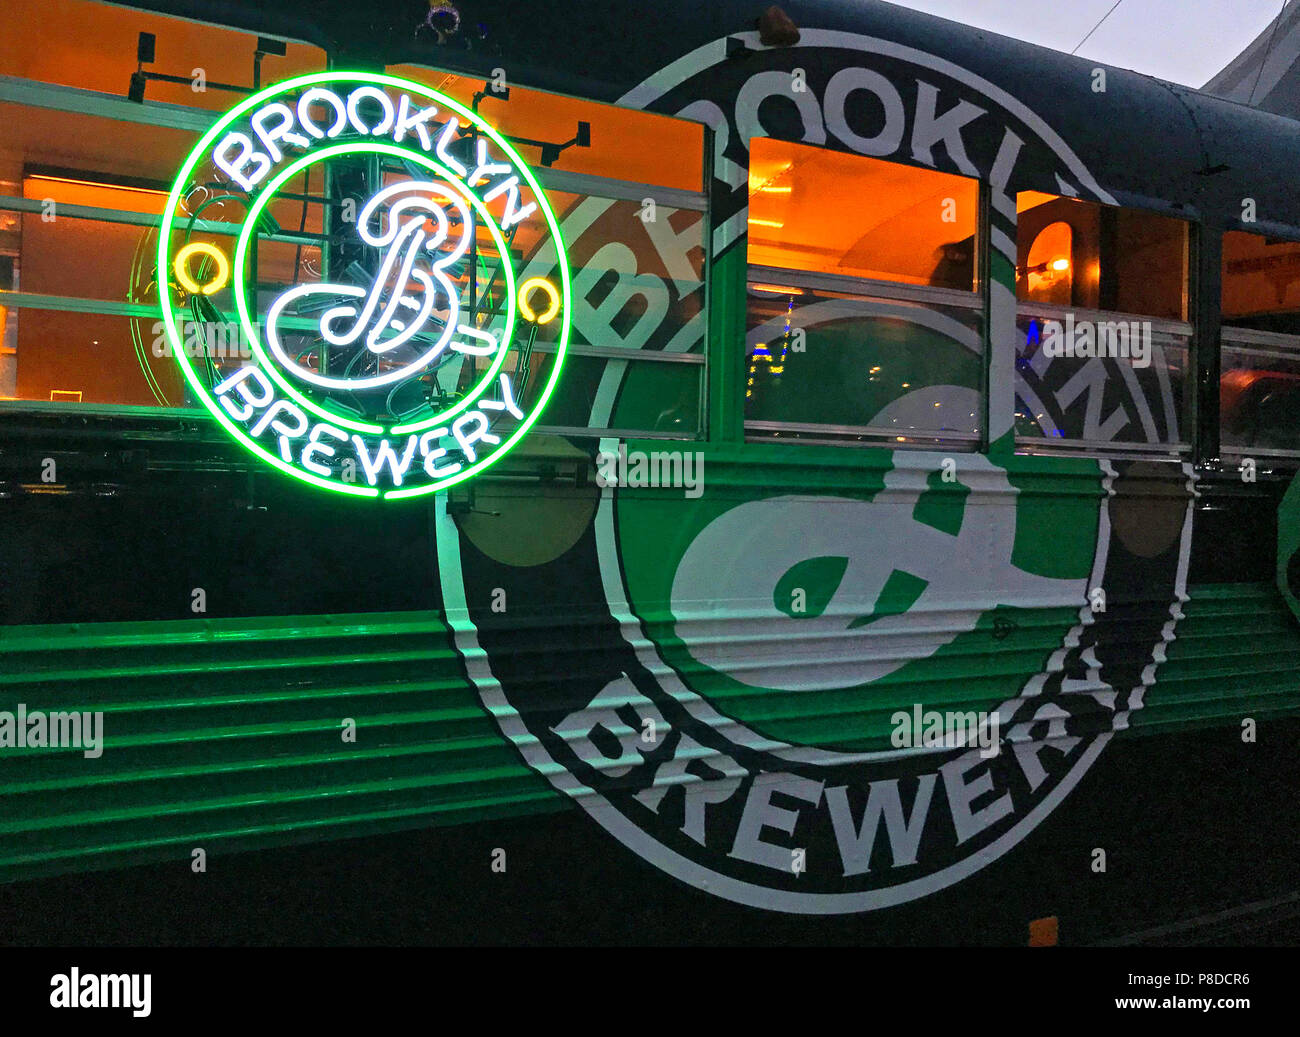 Brooklyn Brewery et bus en néon, bière artisanale, microbrasserie, 79 N 11th St, Brooklyn, New York, NY, 11249, USA Banque D'Images